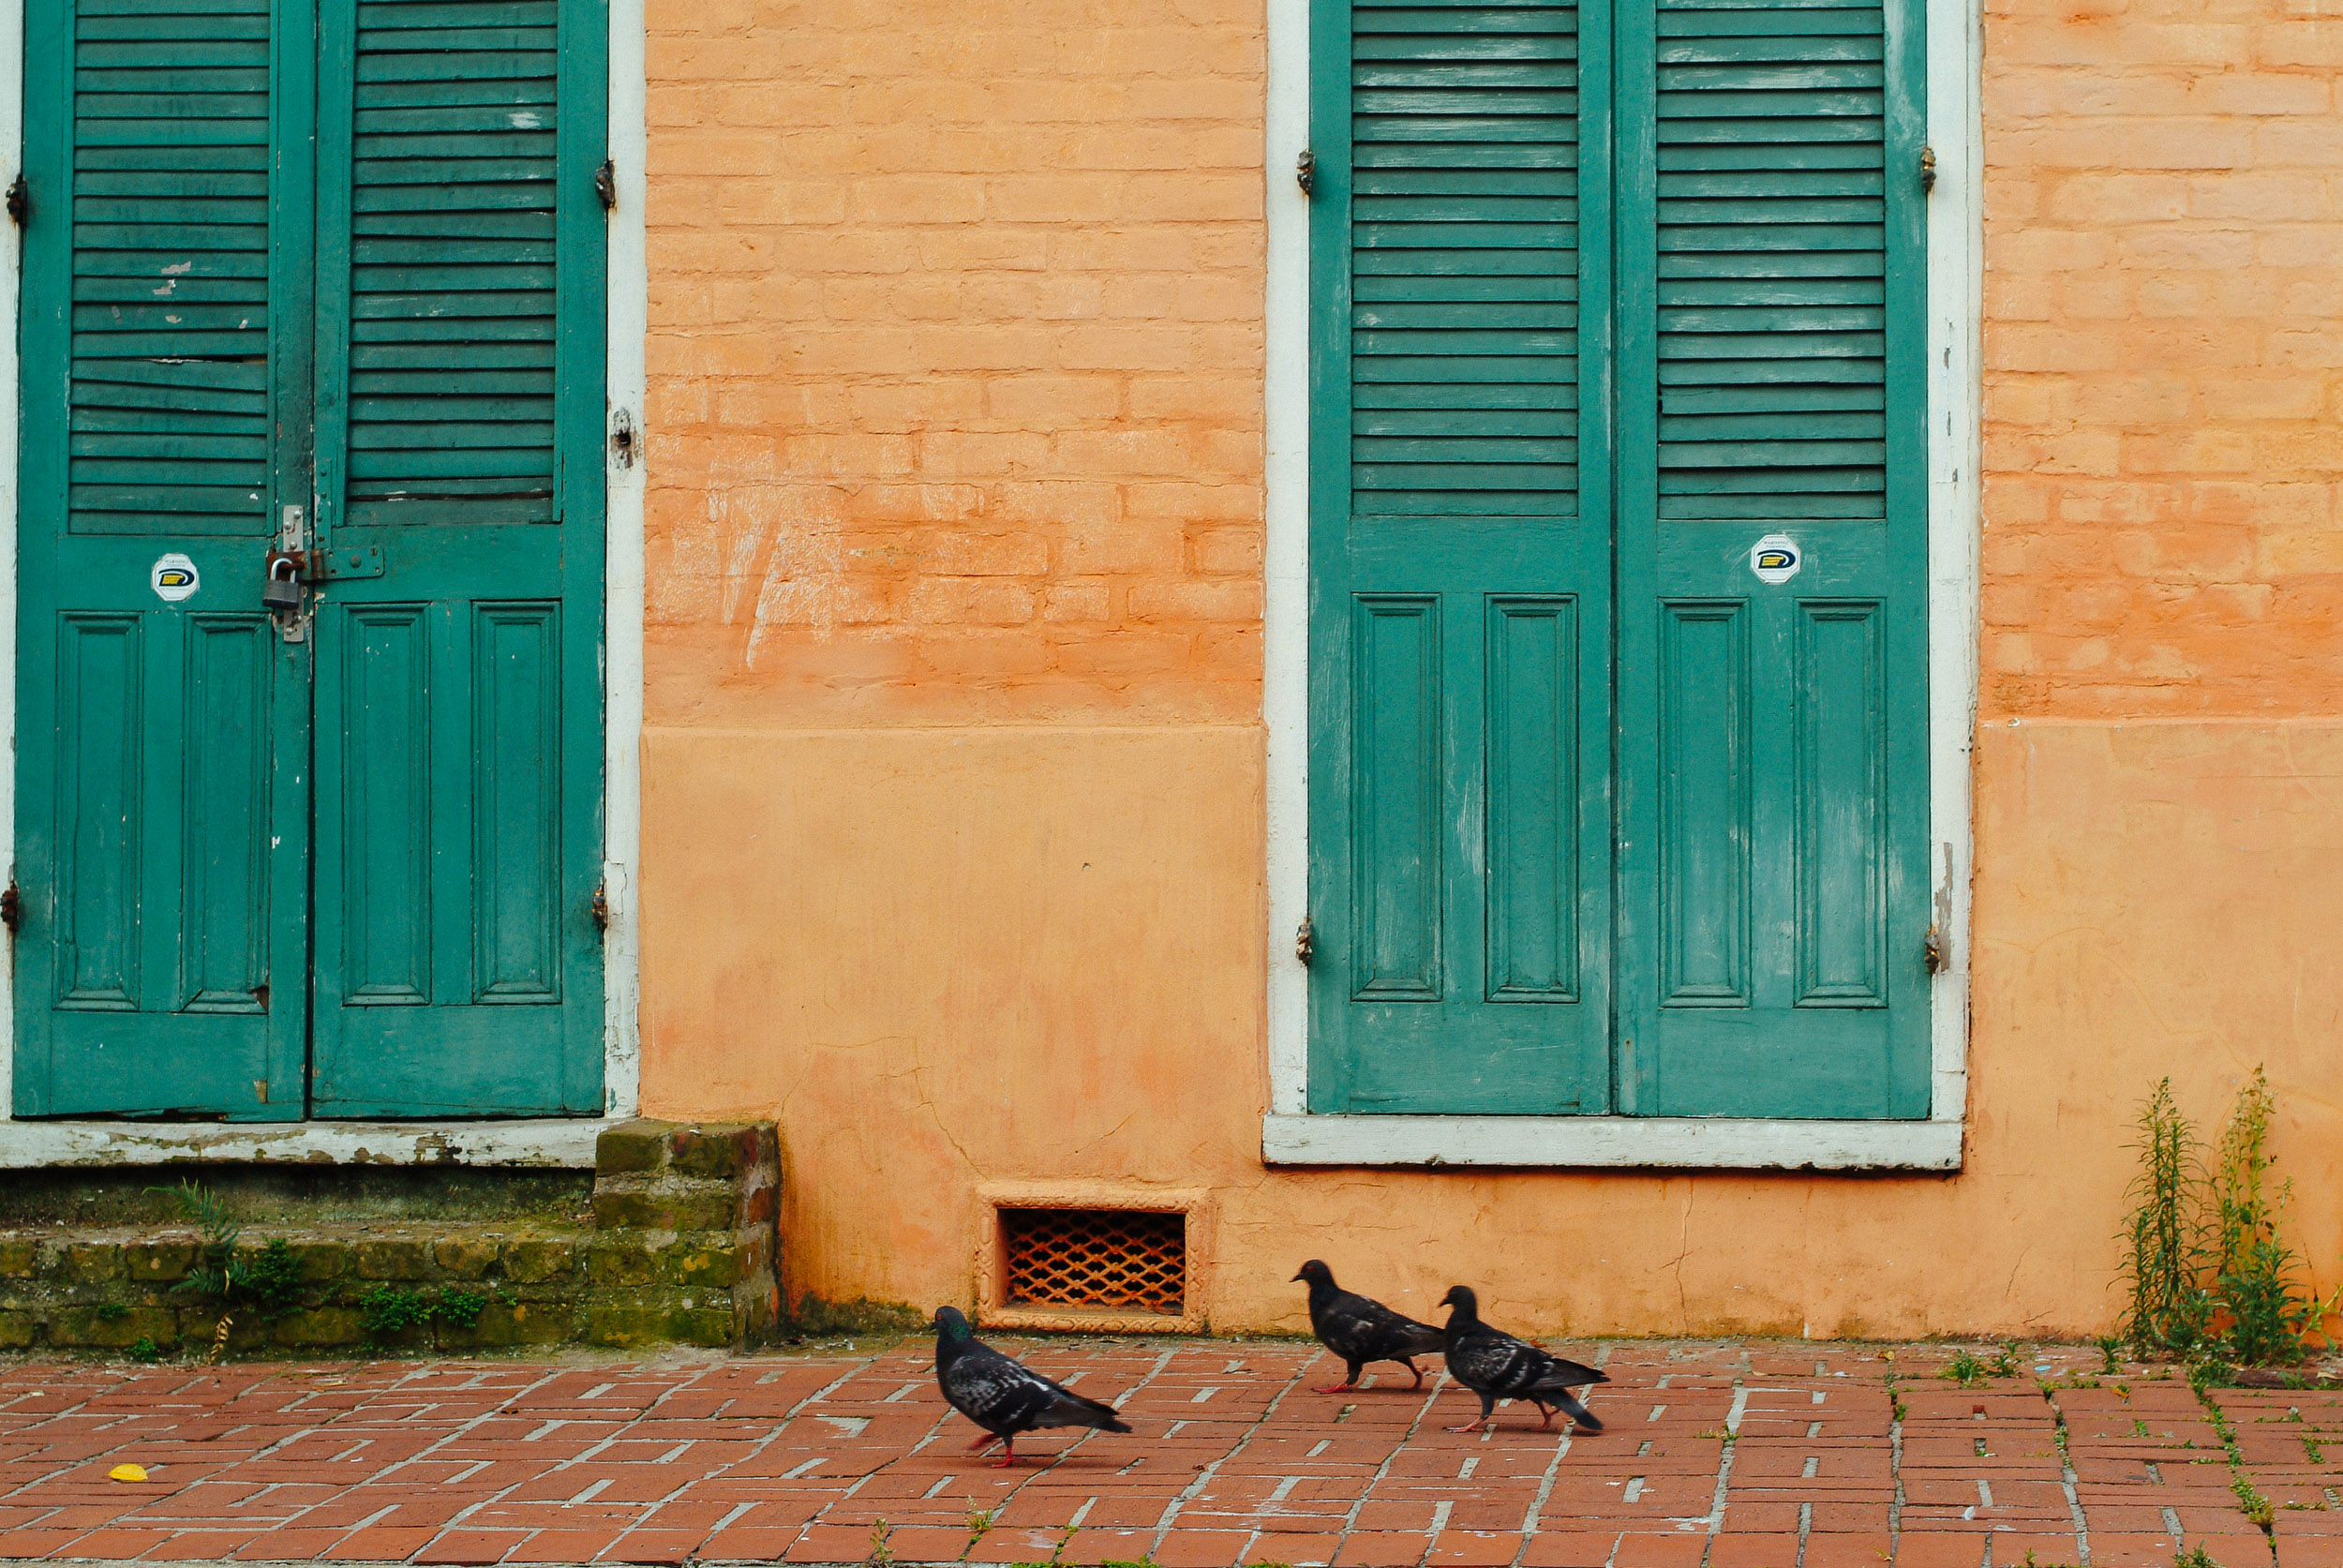 Pigeons survey their domain in the French Quarter